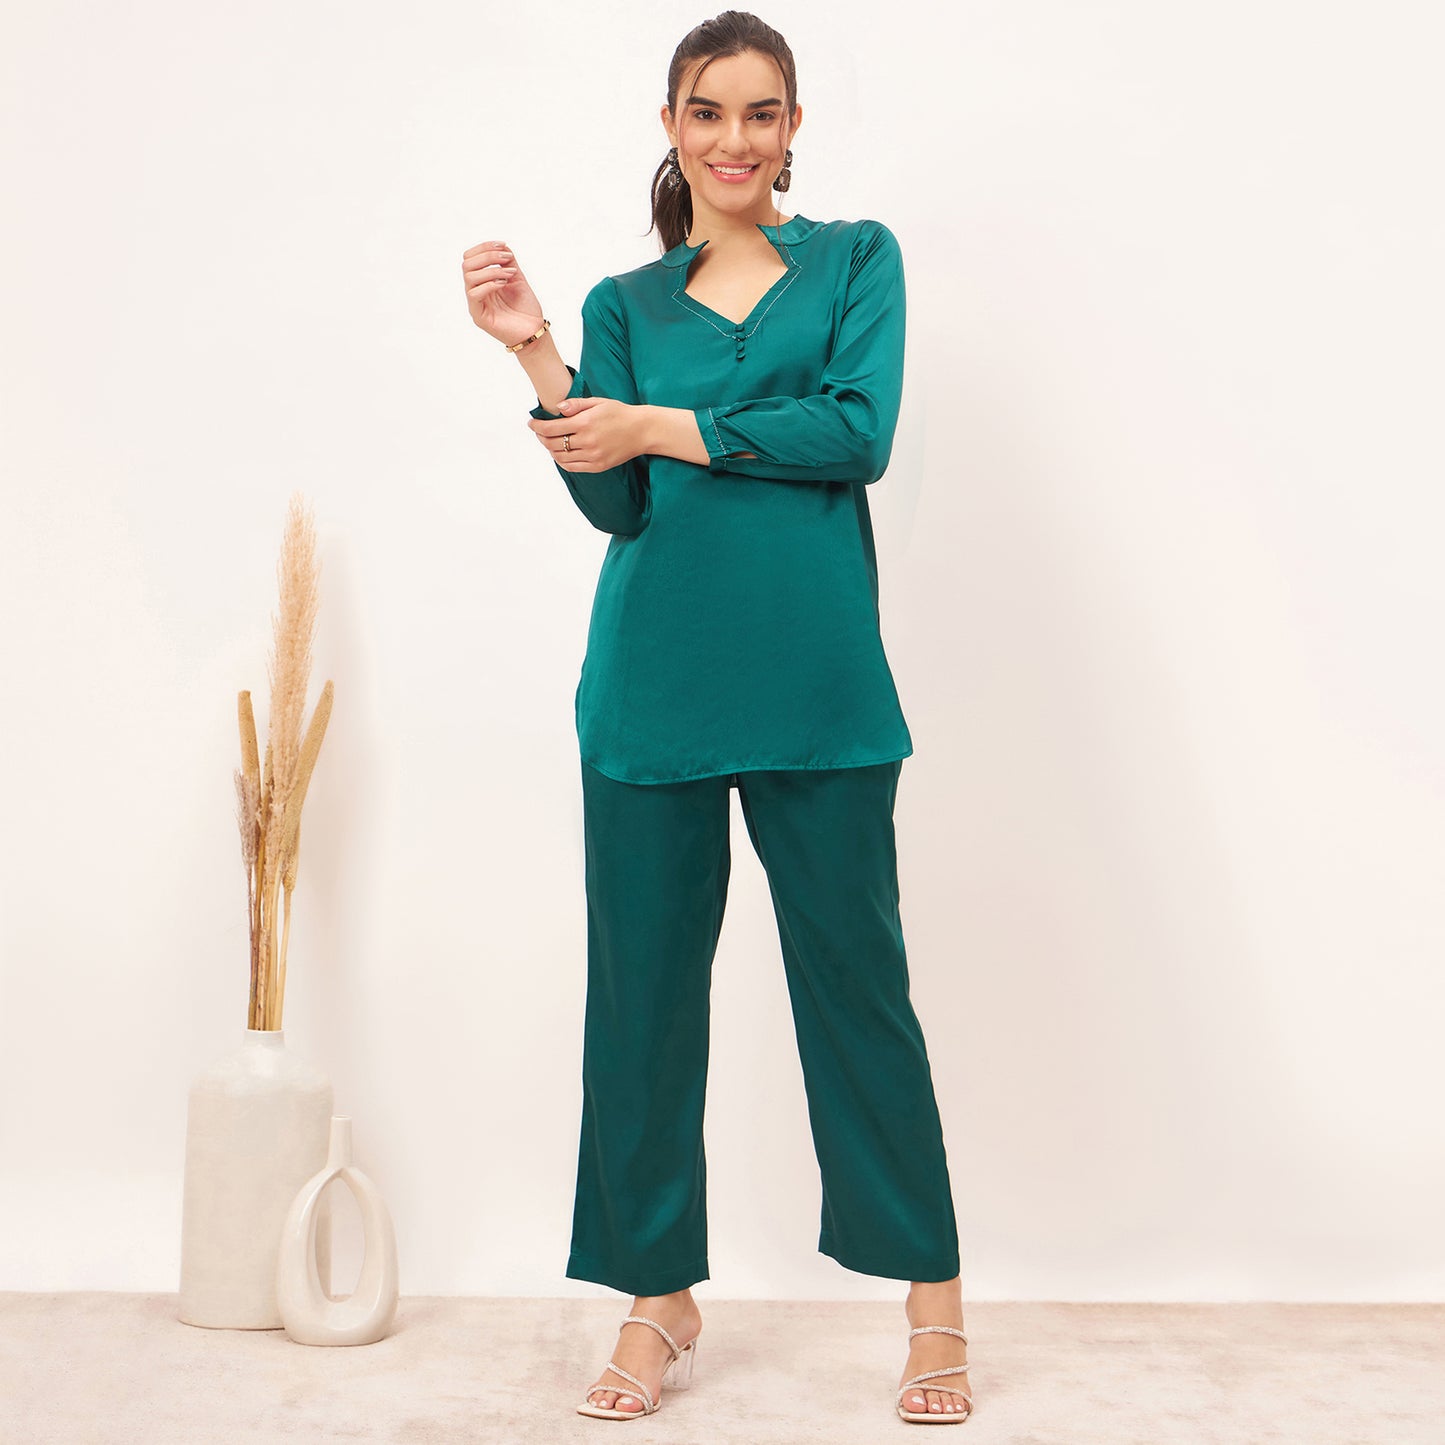 Teal Embellished Satin Top with Straight Pants